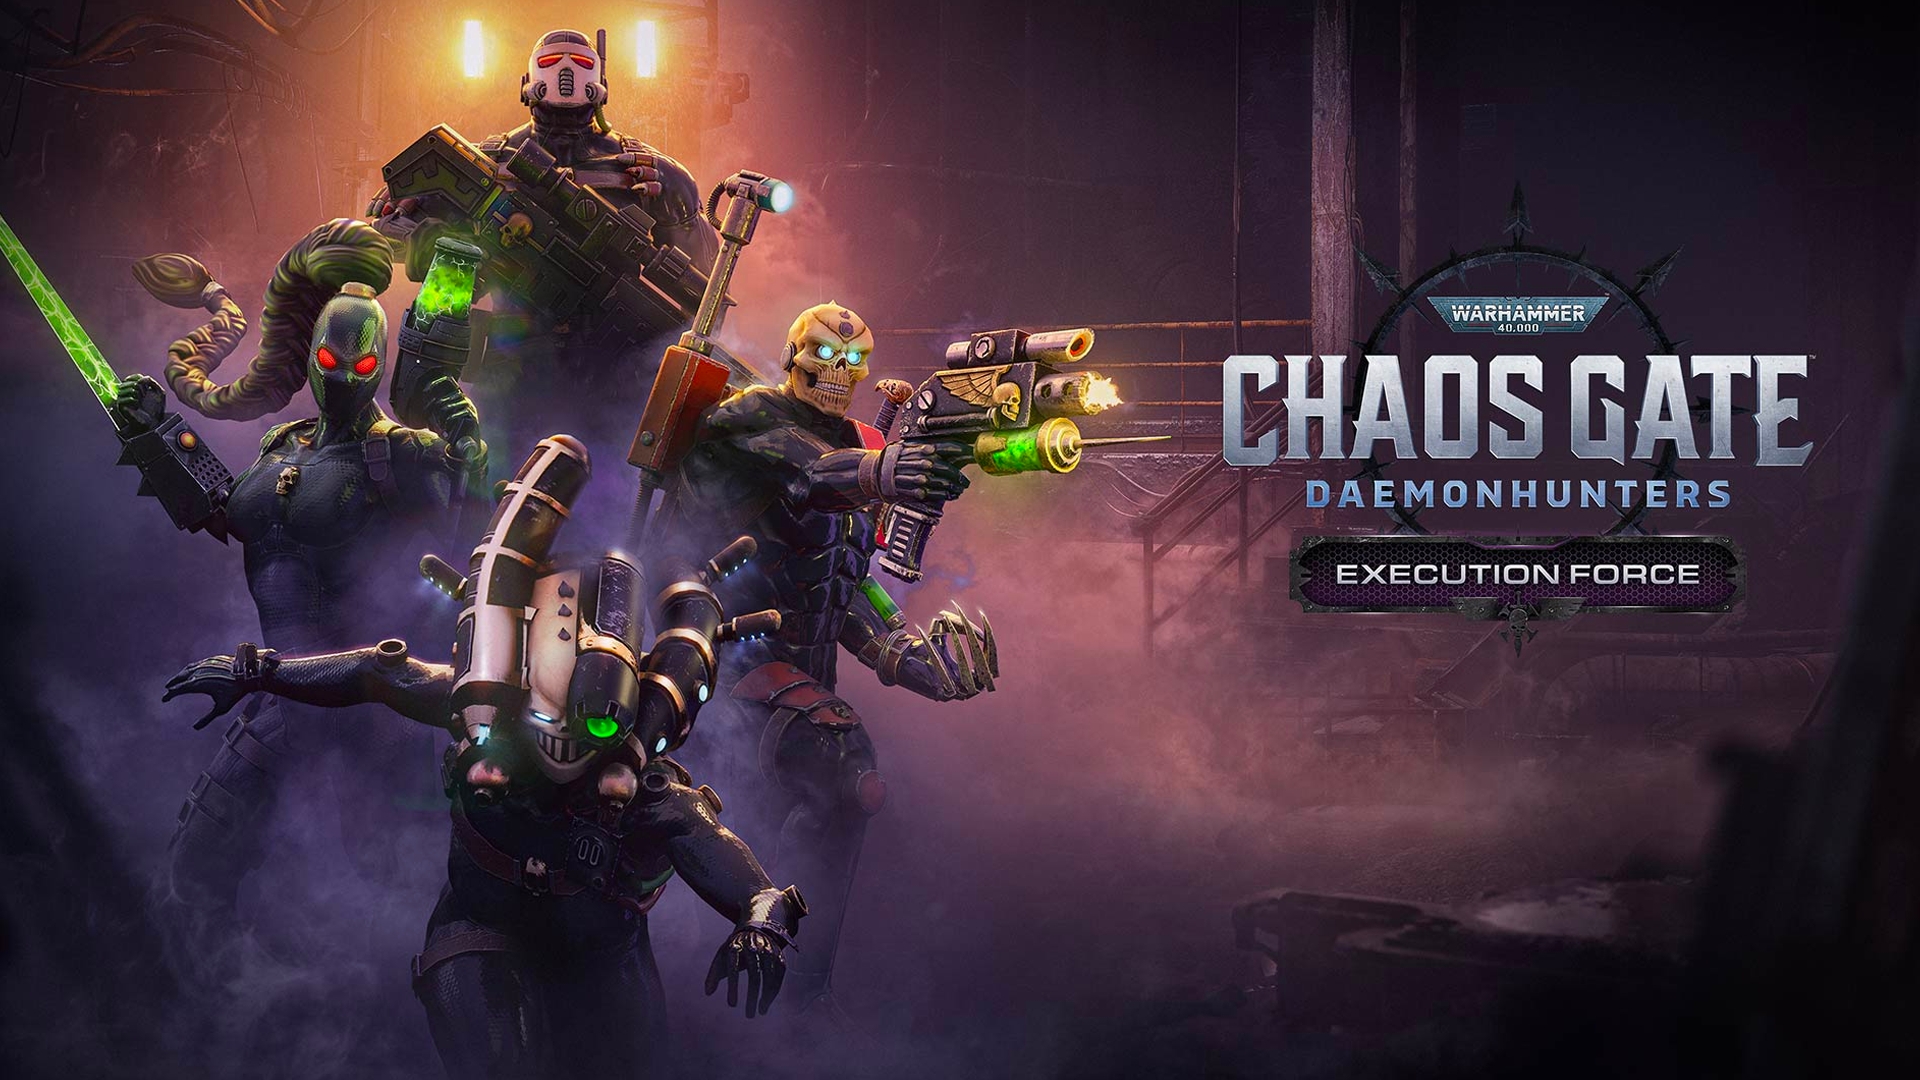 Buy Warhammer 40,000: Chaos Gate - Daemonhunters - Execution Force Steam